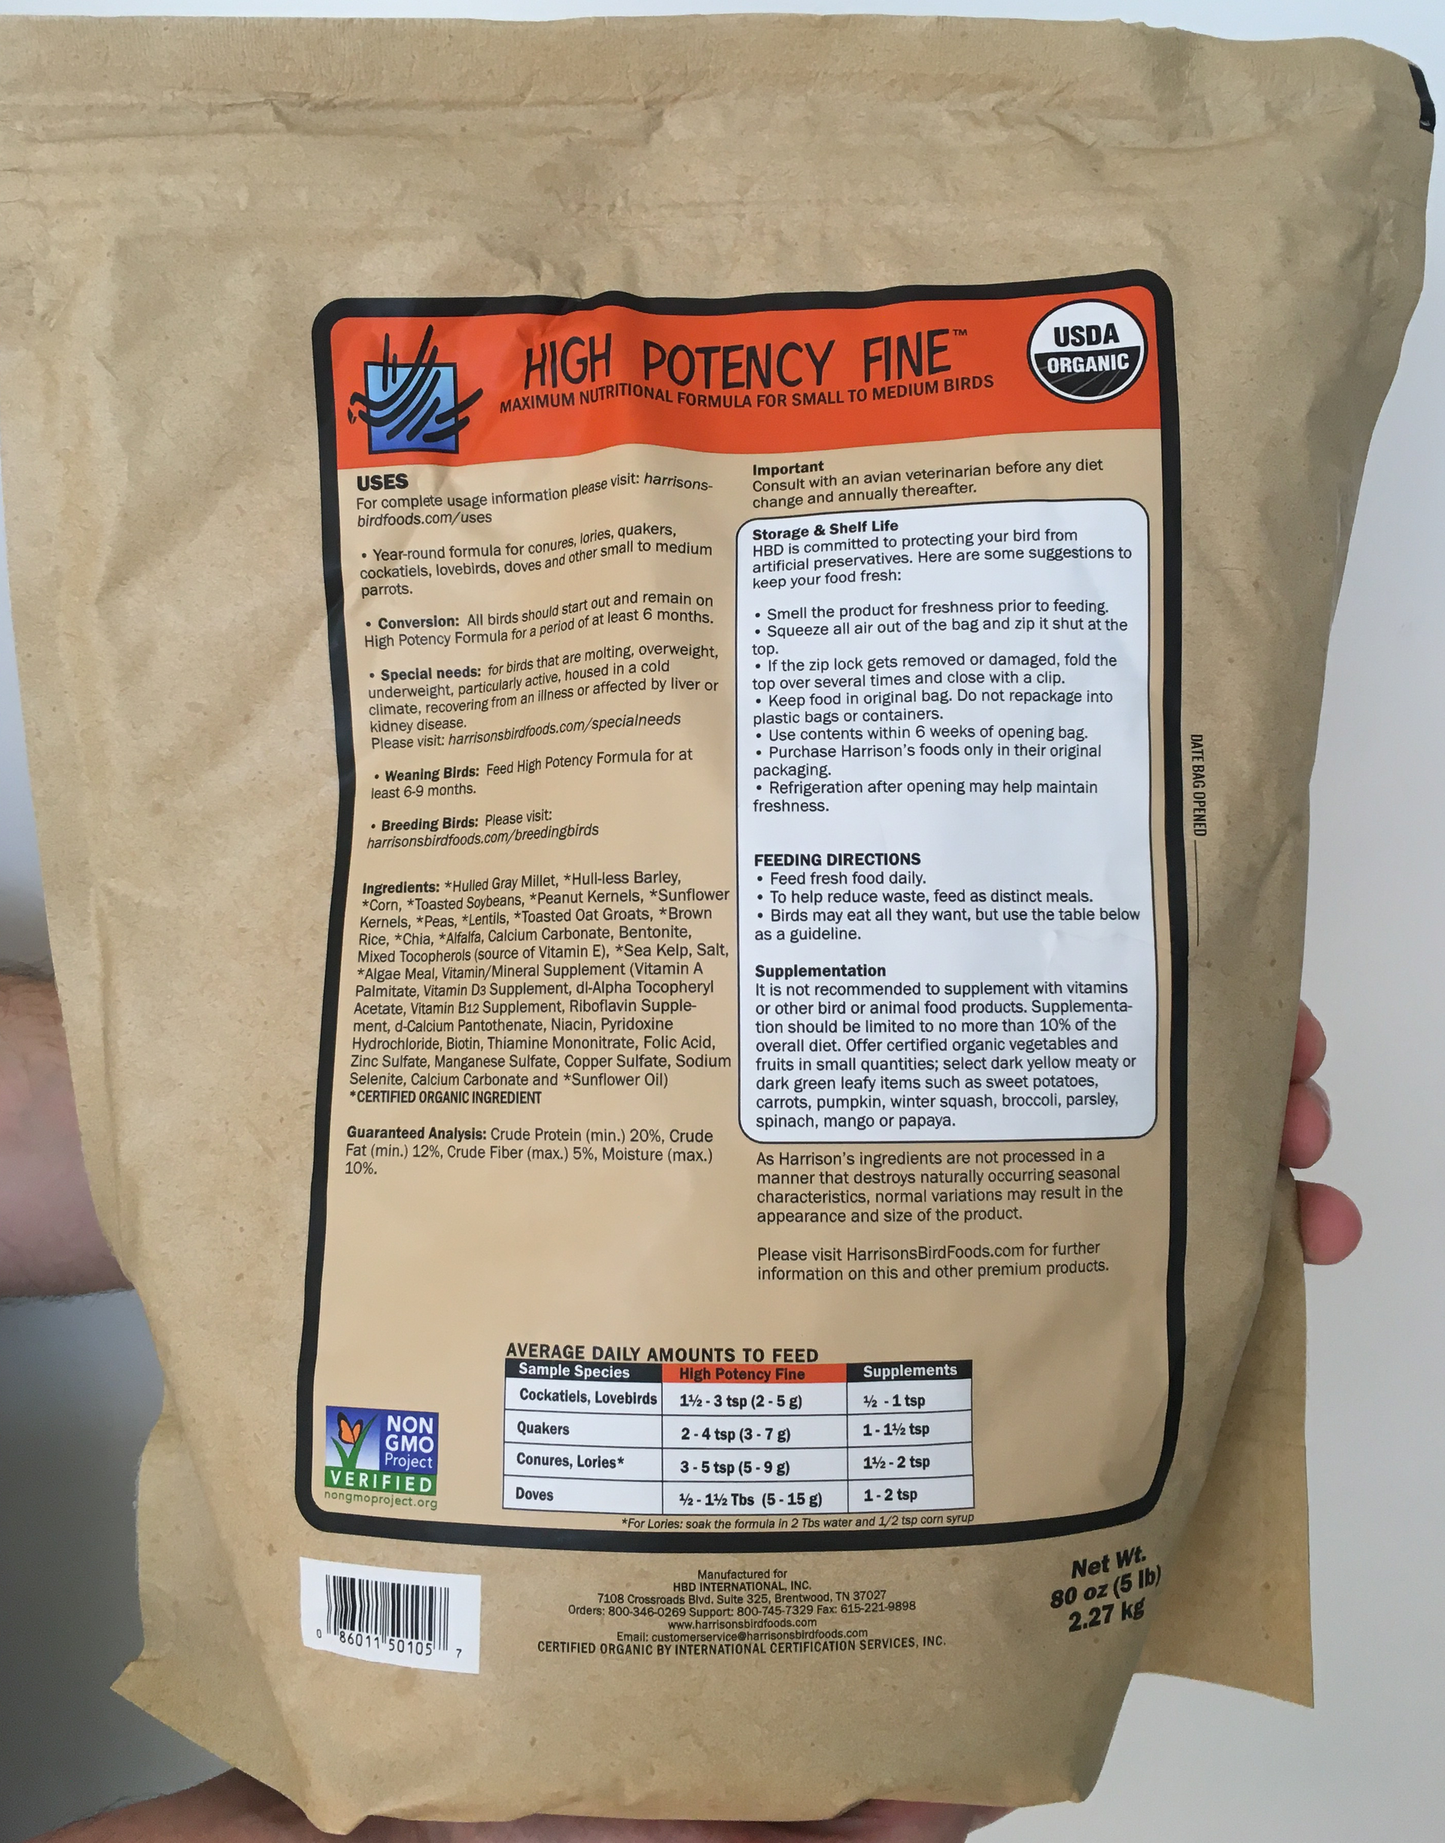 back of the large orange bag of Harrison's High Potency Fine premium pellets for parrots, suitable for smaller birds with higher nutritional needs, with feeding instructions